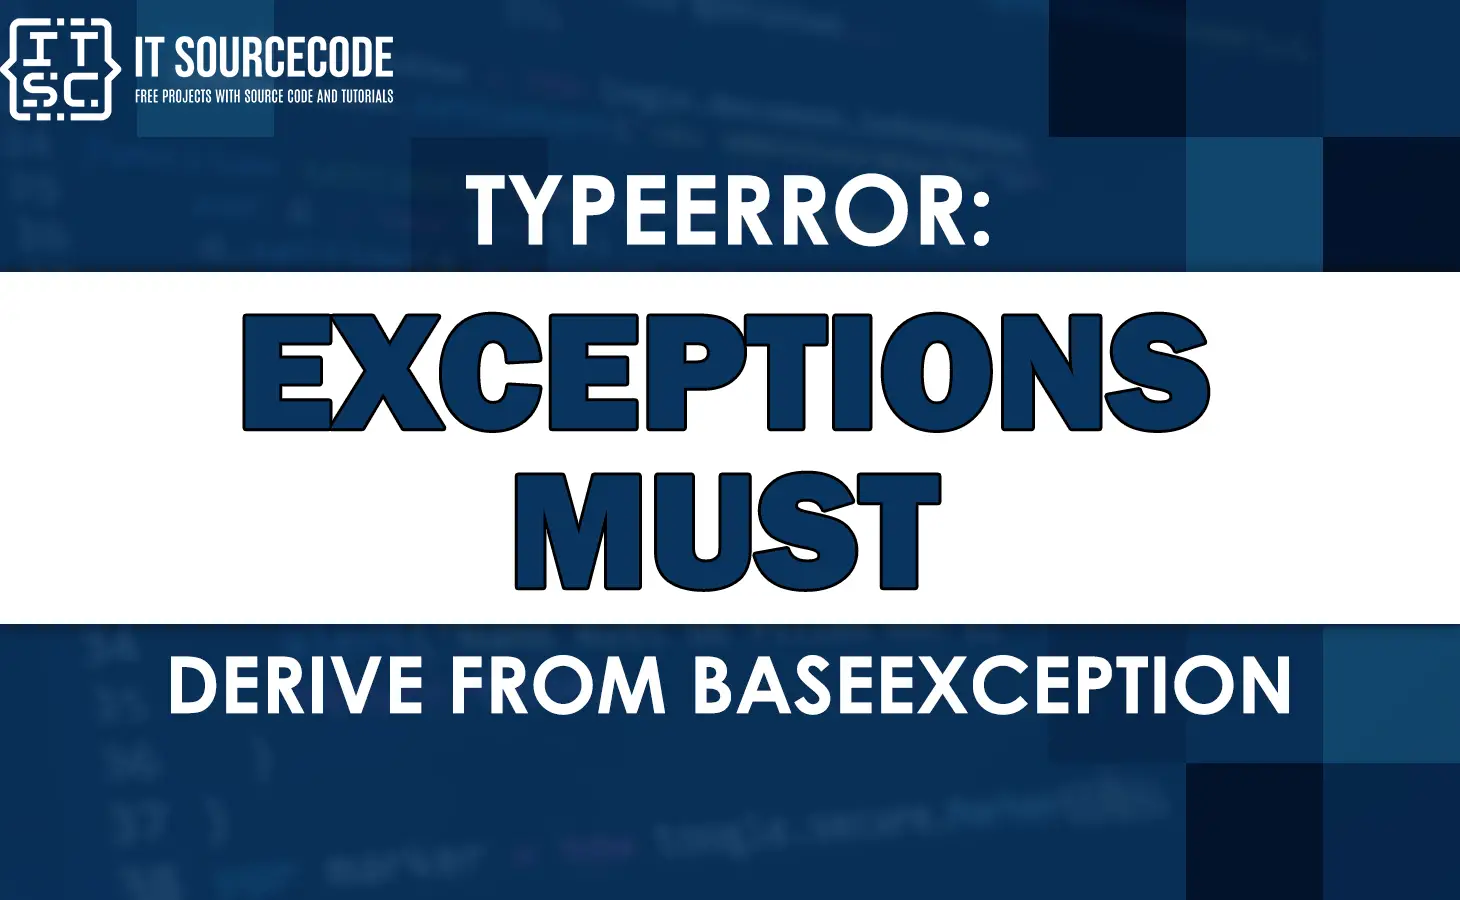 what does mean exceptions must derive from BaseException? · Issue #16 ·  rmotr-curriculum/advanced-python-programming-questions · GitHub